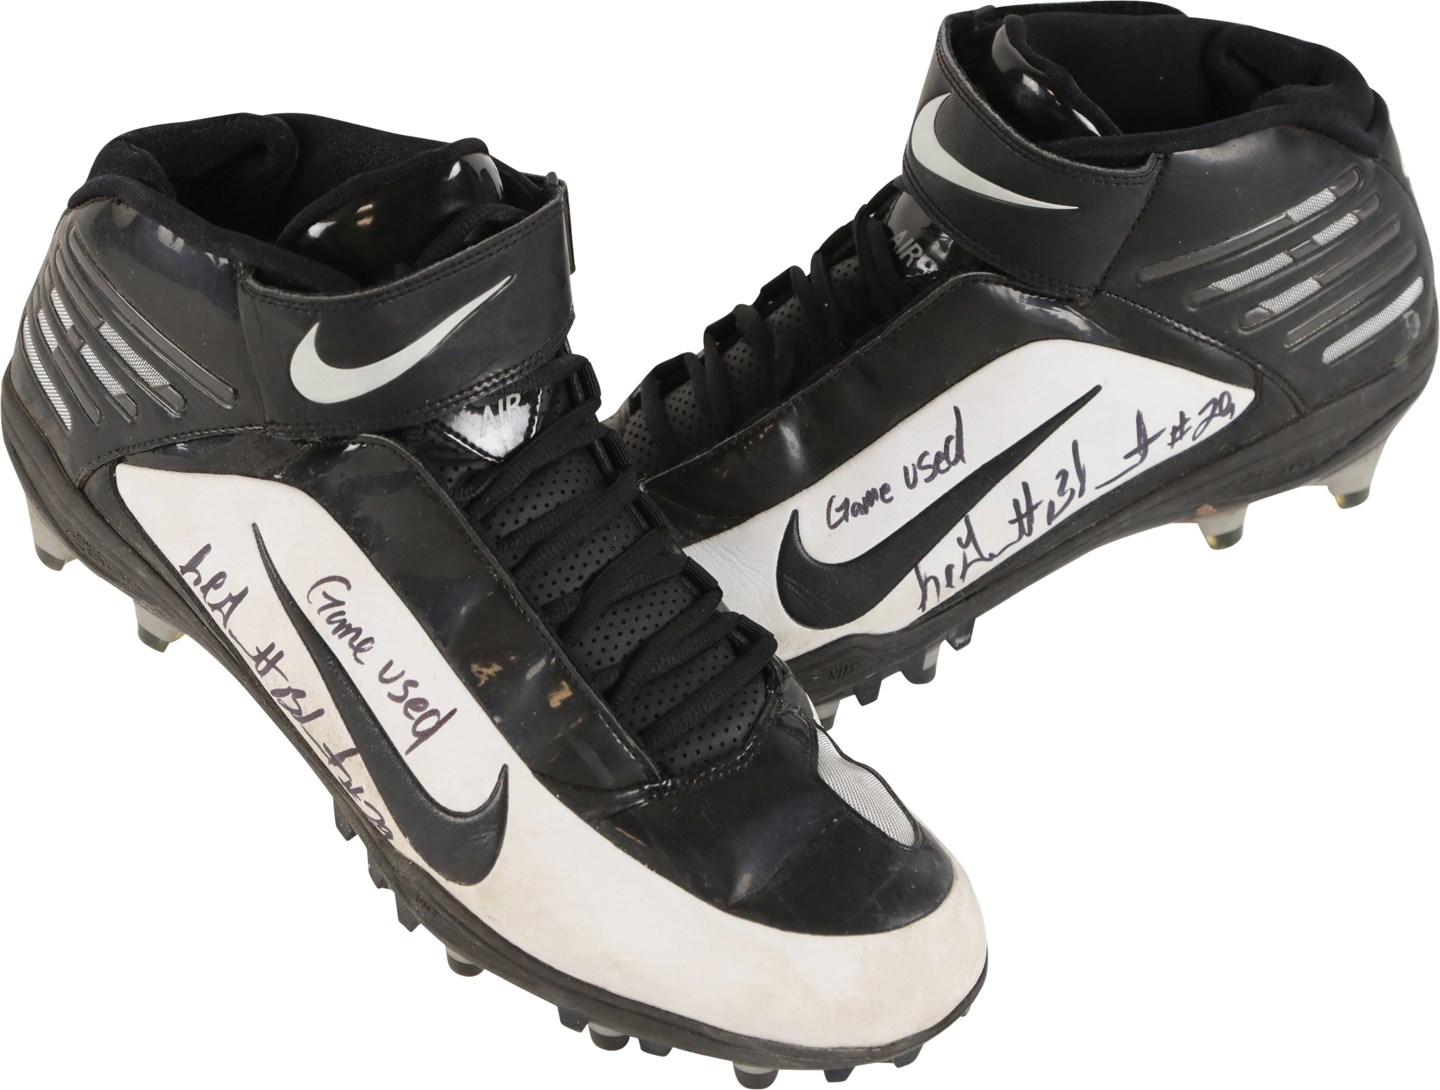 2013 LeGarrette Blount New England Patriots Signed Game Worn Cleats (Player Sourced & JSA)